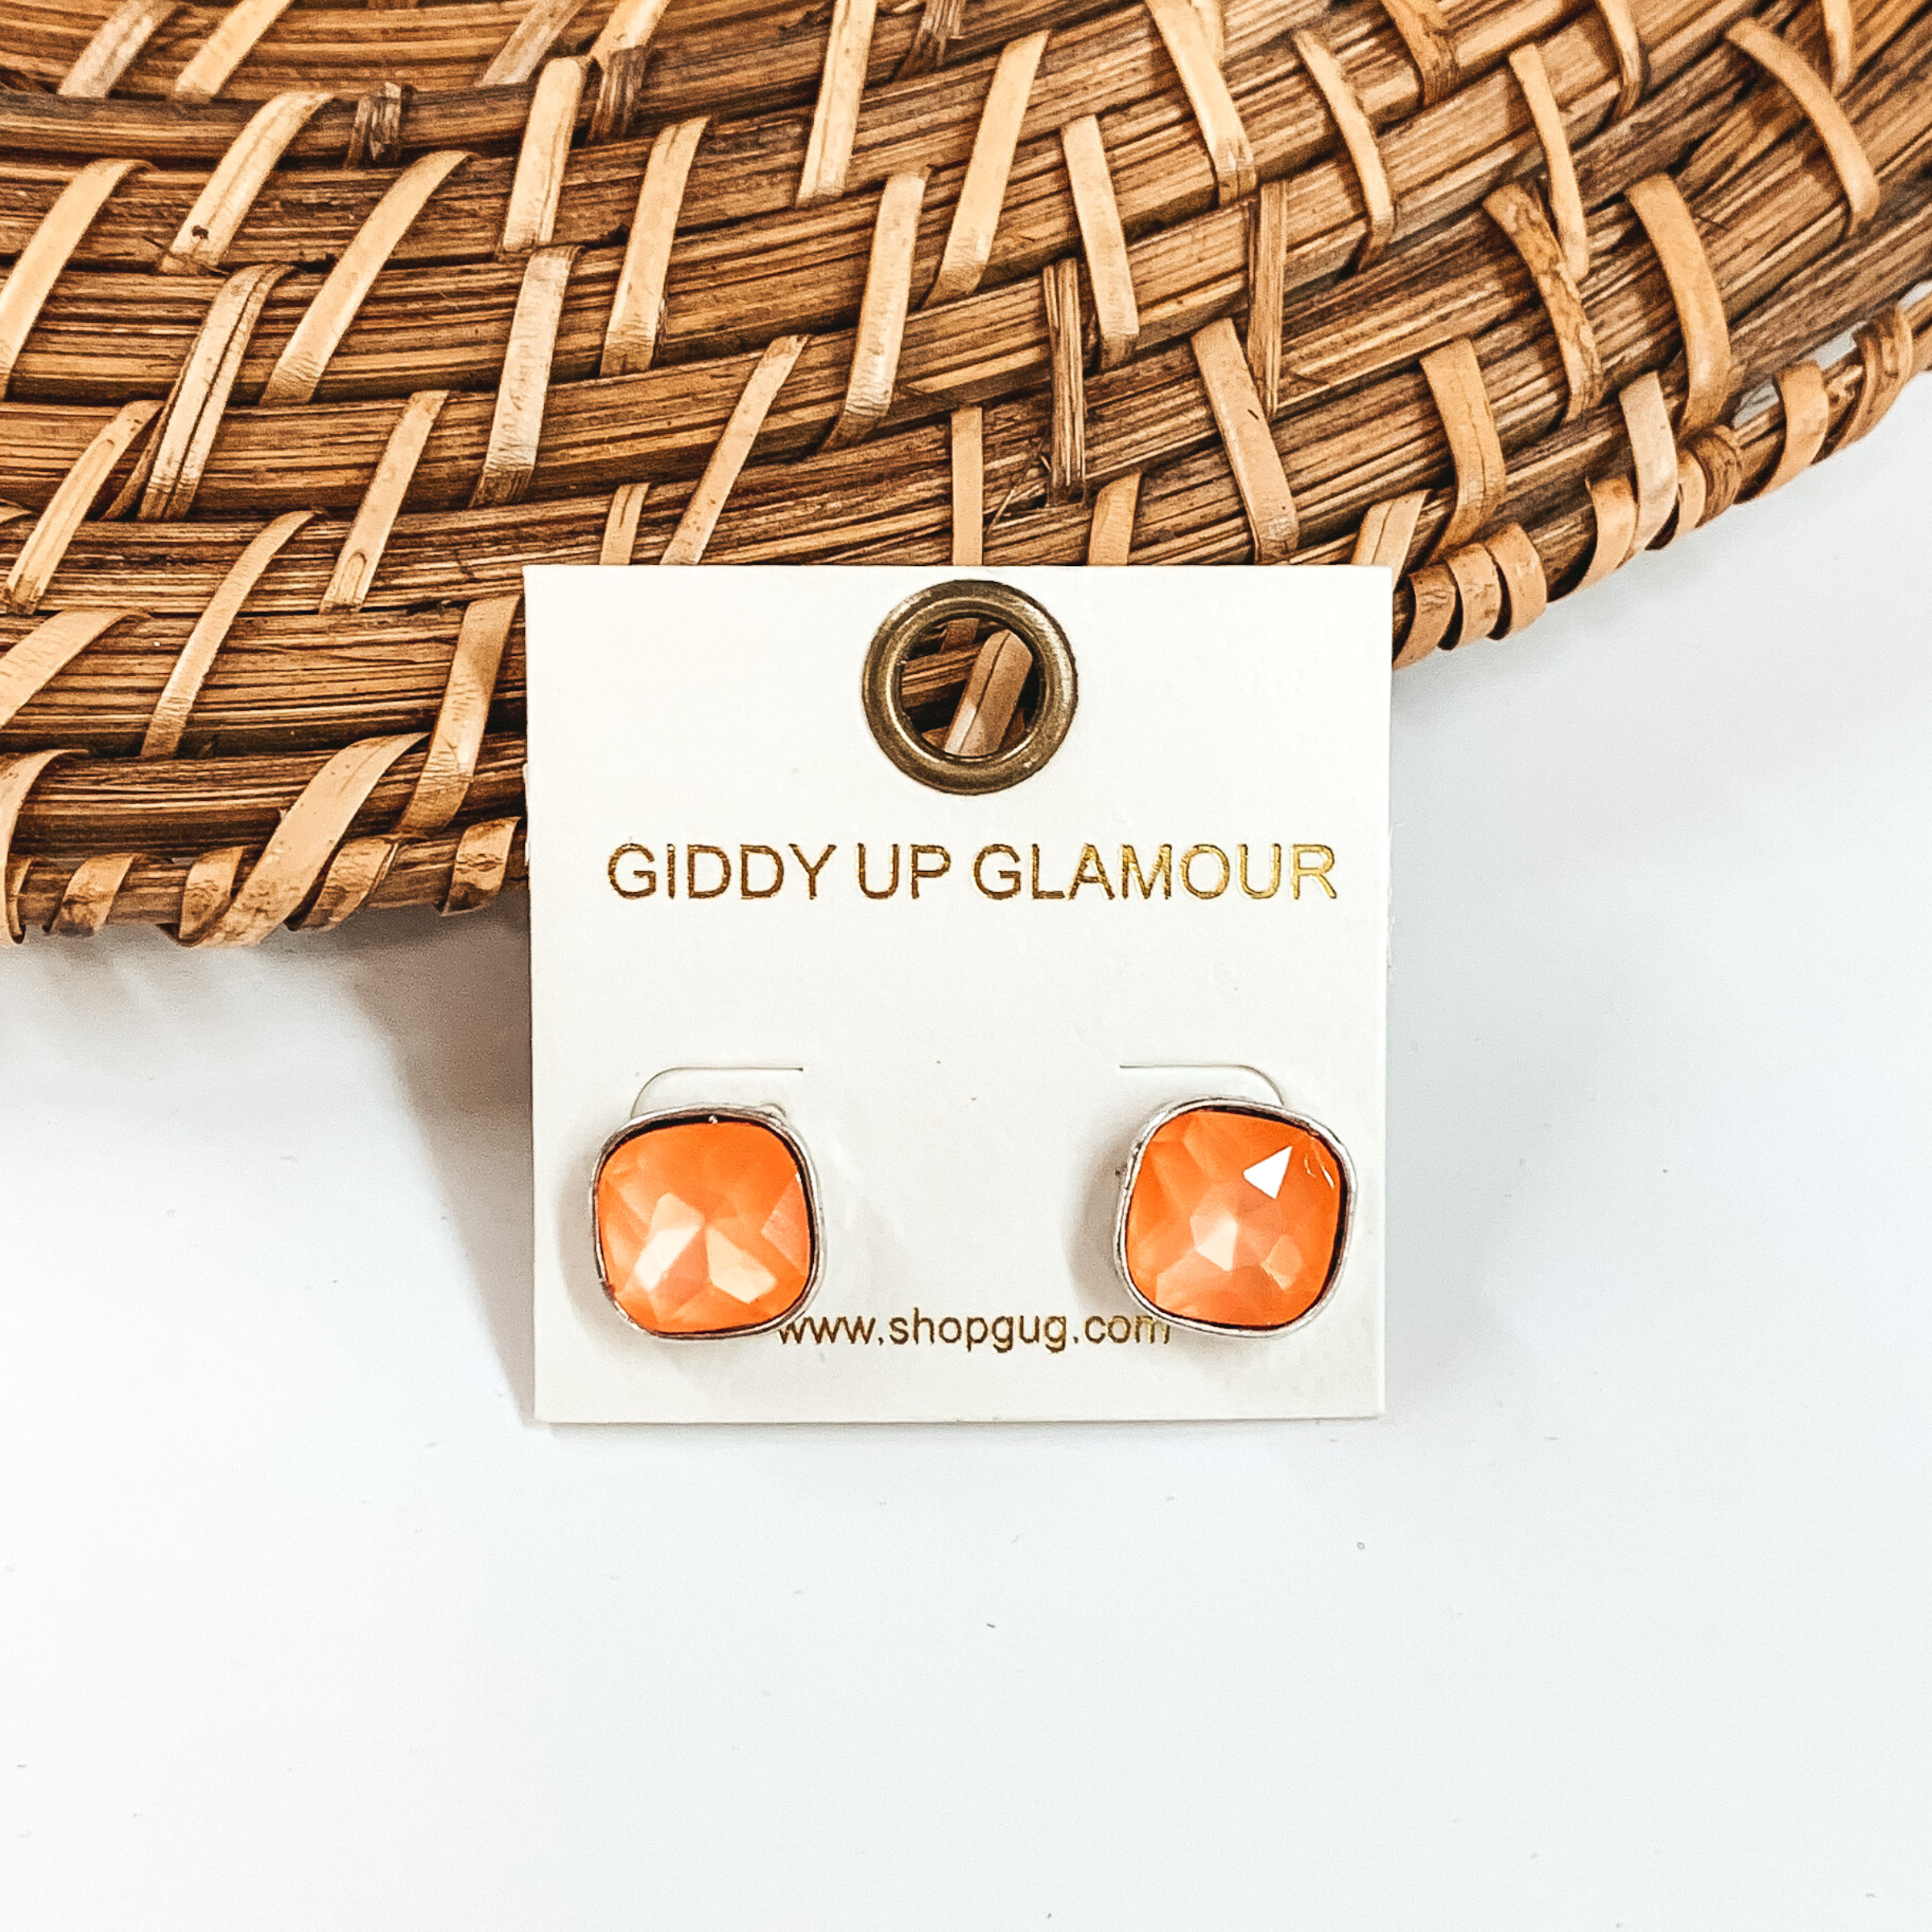 Silver, square stud earrings with orange colored crystals. These earrings are pictured on a white GUG earrings holder on a white background with brown basket weave material behind the earrings. 